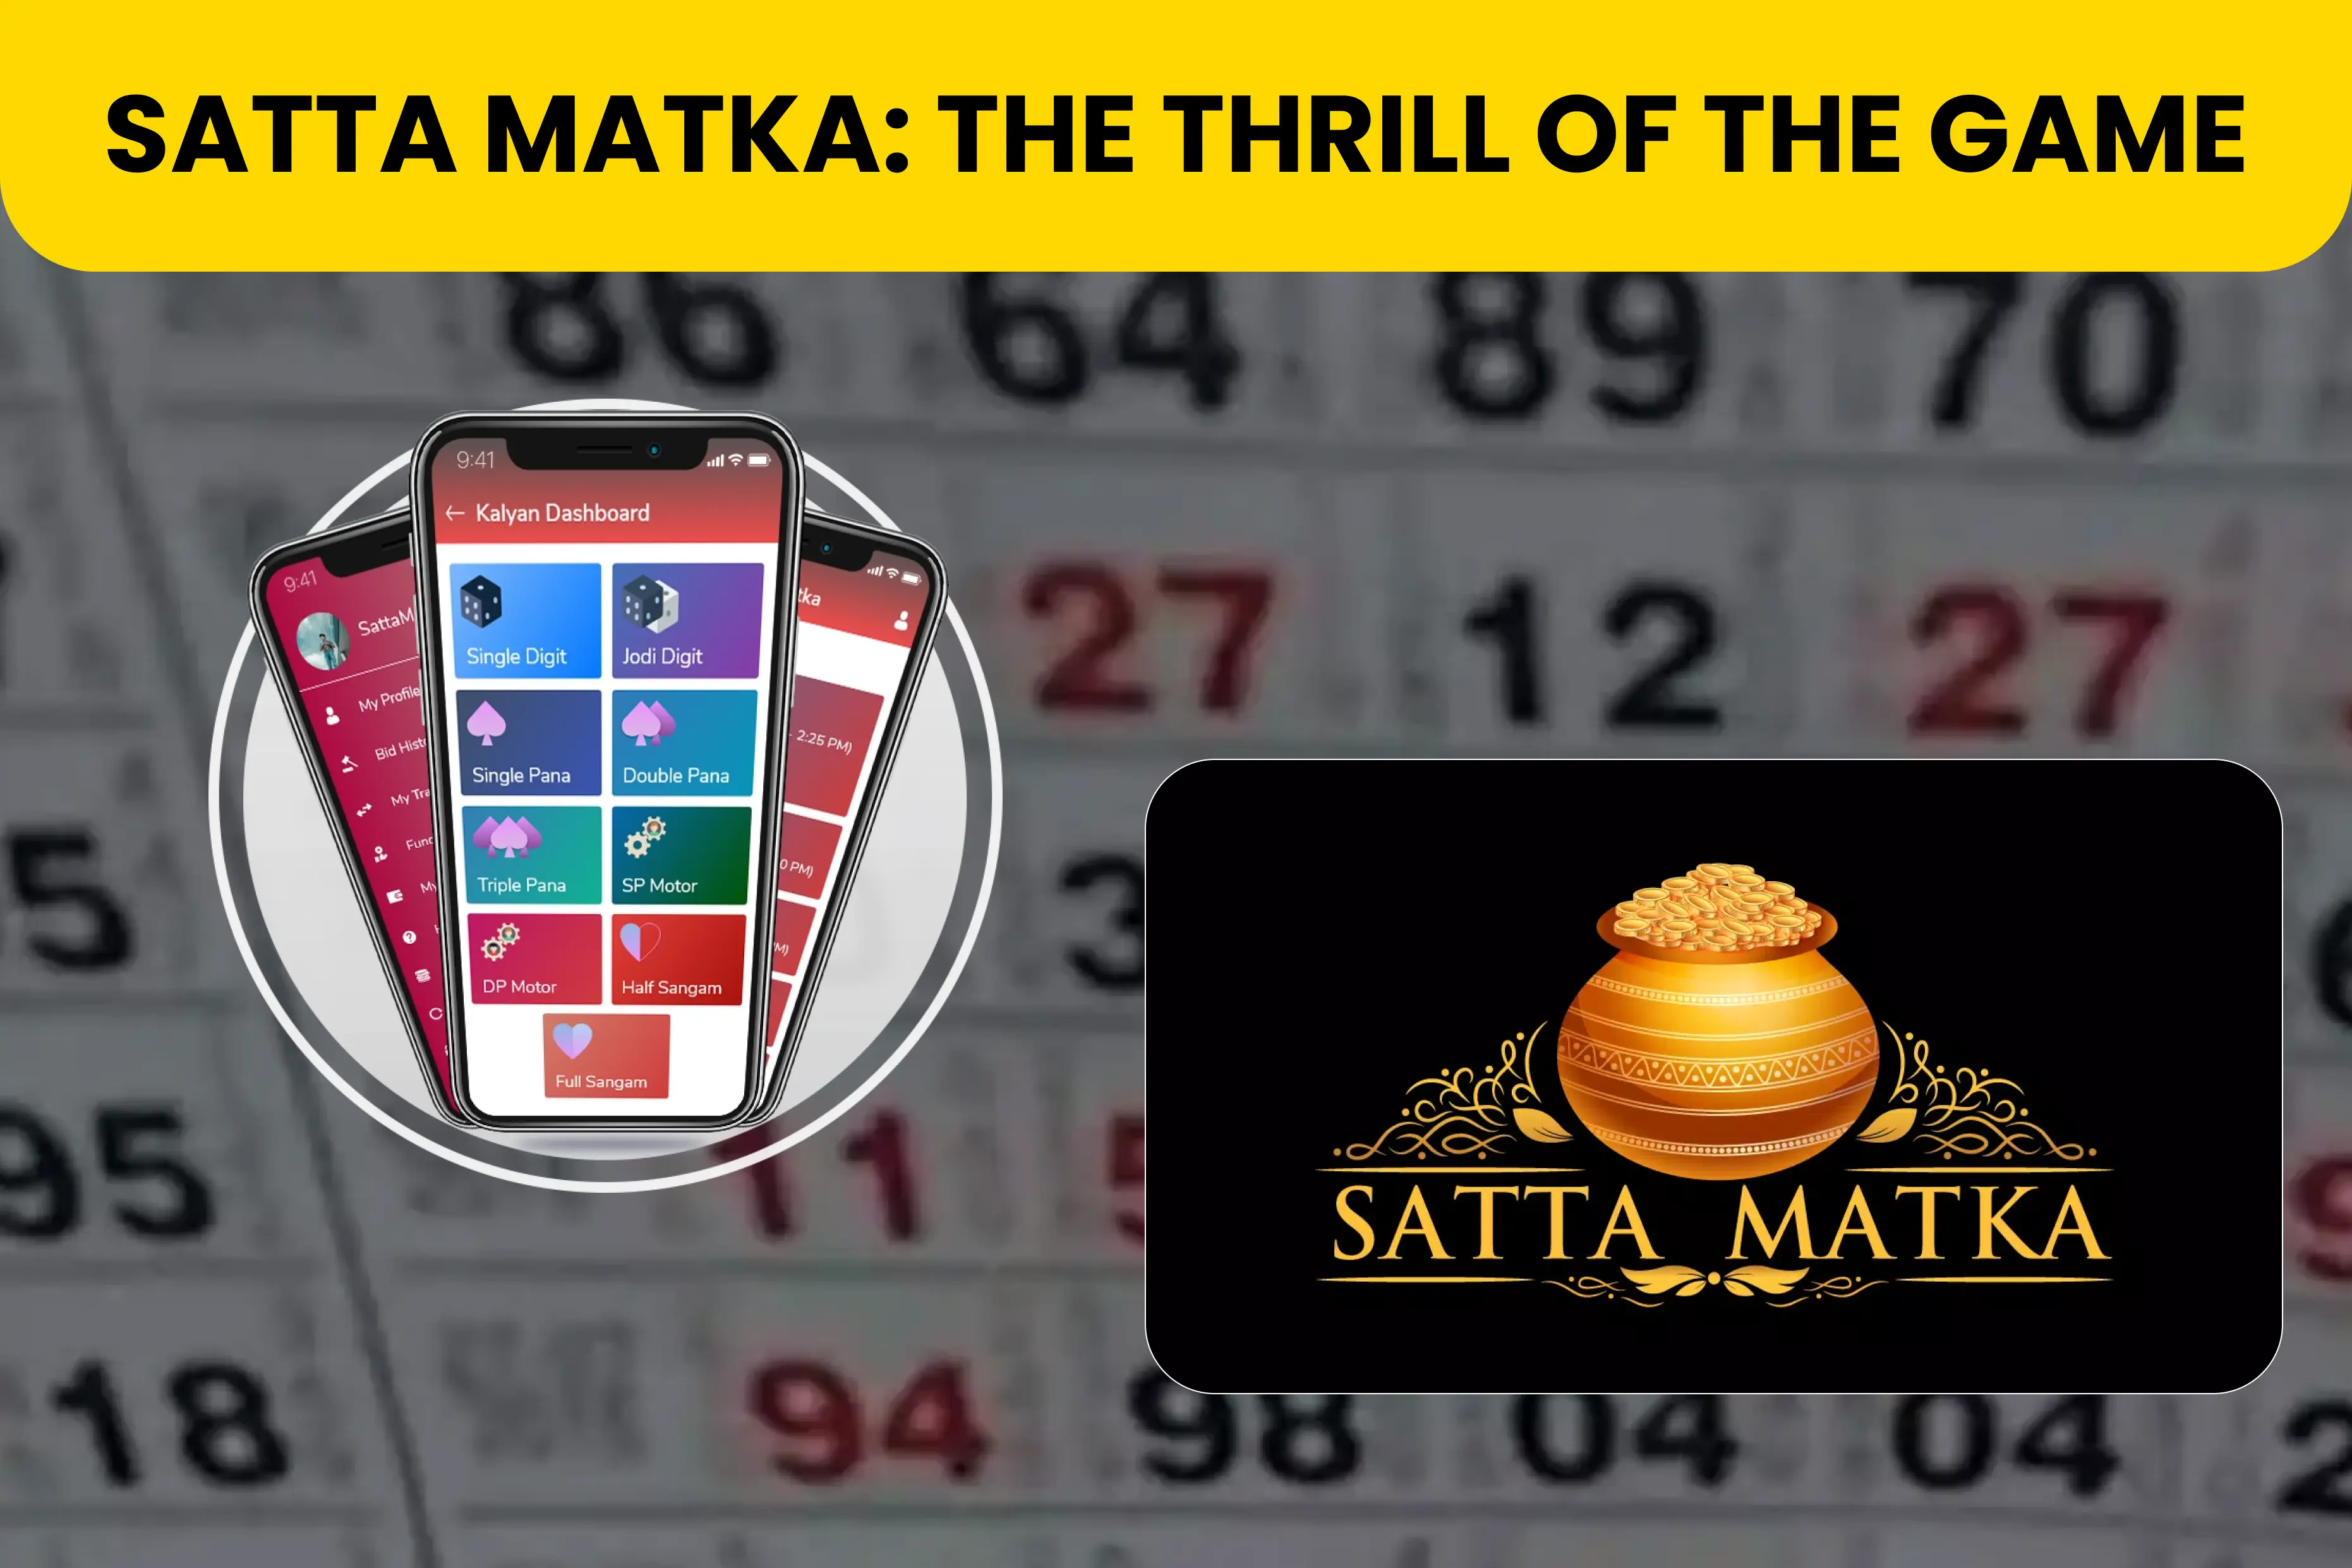 Satta Matka: The Thrill of the Game